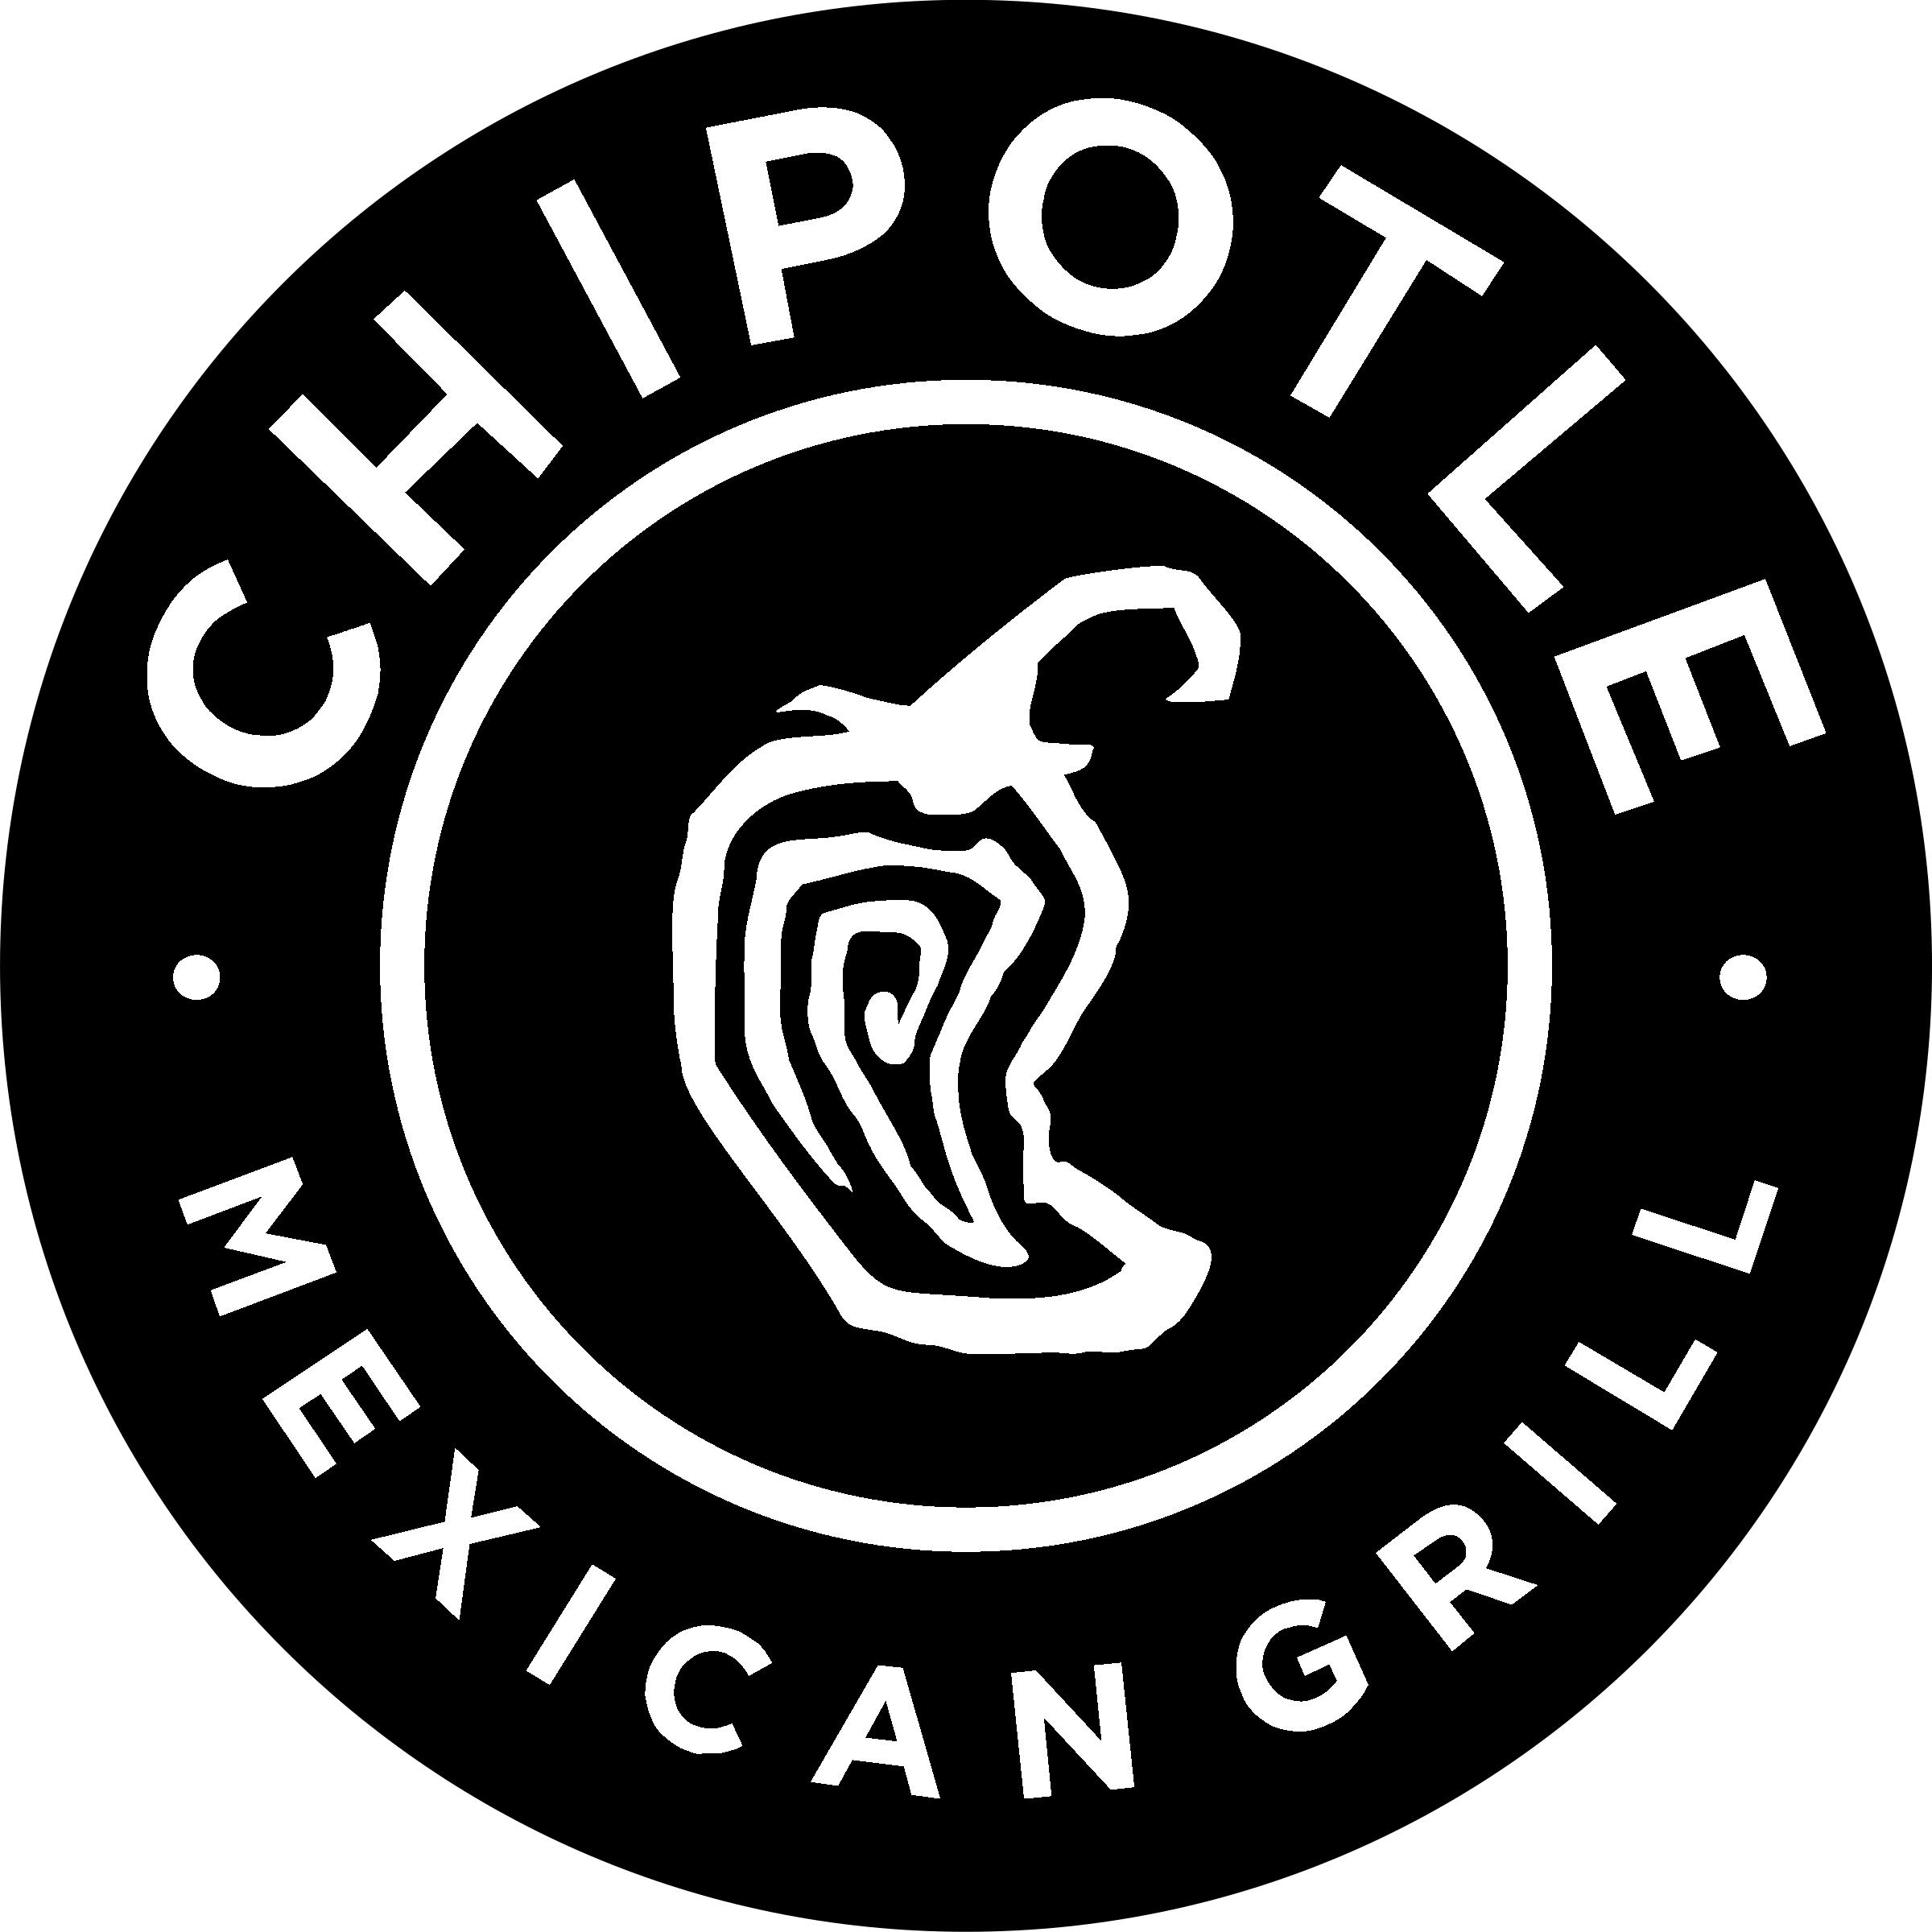 Mexican Black and White Logo - Chipotle Mexican Grill Logo SVG Vector & PNG Transparent - Vector ...